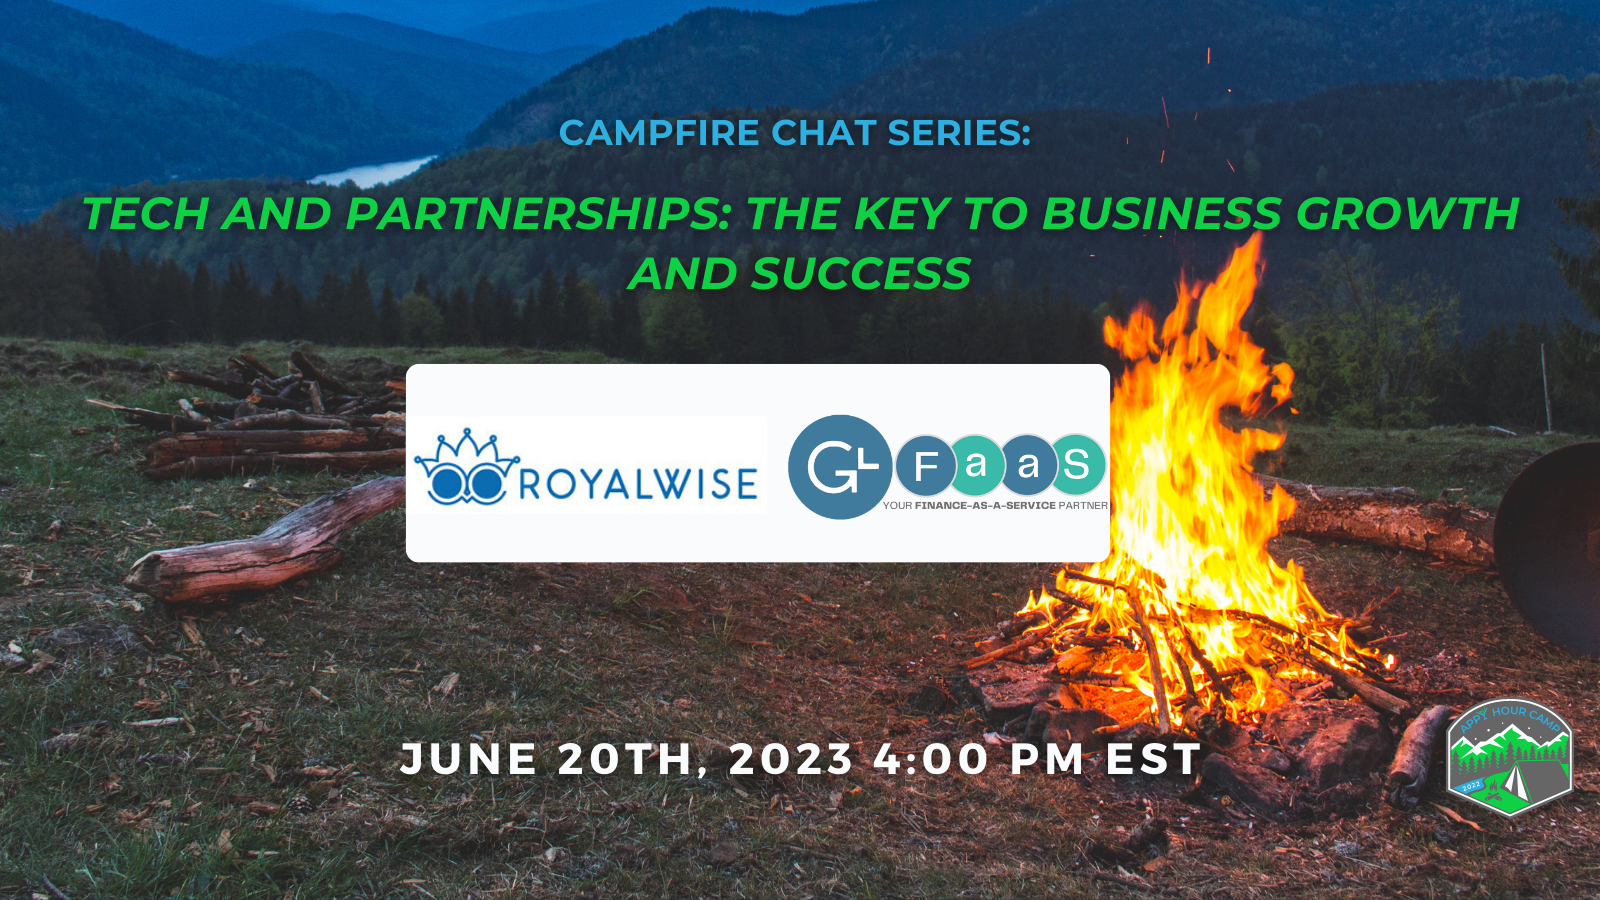 Campfire Chat Series: Royalwise, GrowthLab: Tech and Partnerships